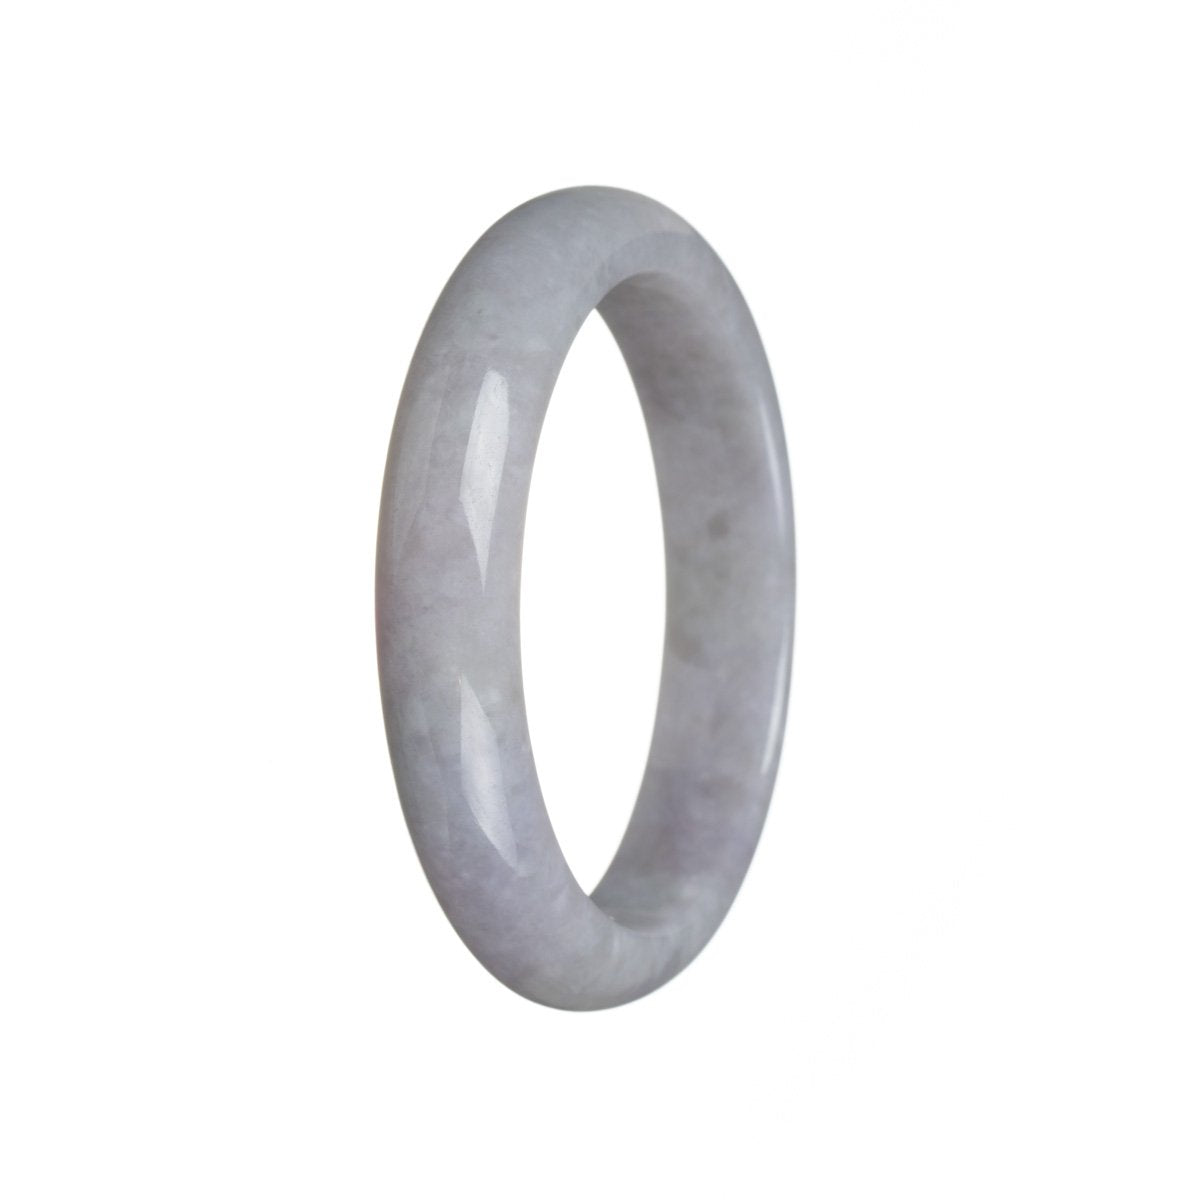 A lavender Burmese jade bangle with a 58mm half moon shape, offering a genuine Grade A quality. Perfect for adding a touch of elegance and natural beauty to your collection.